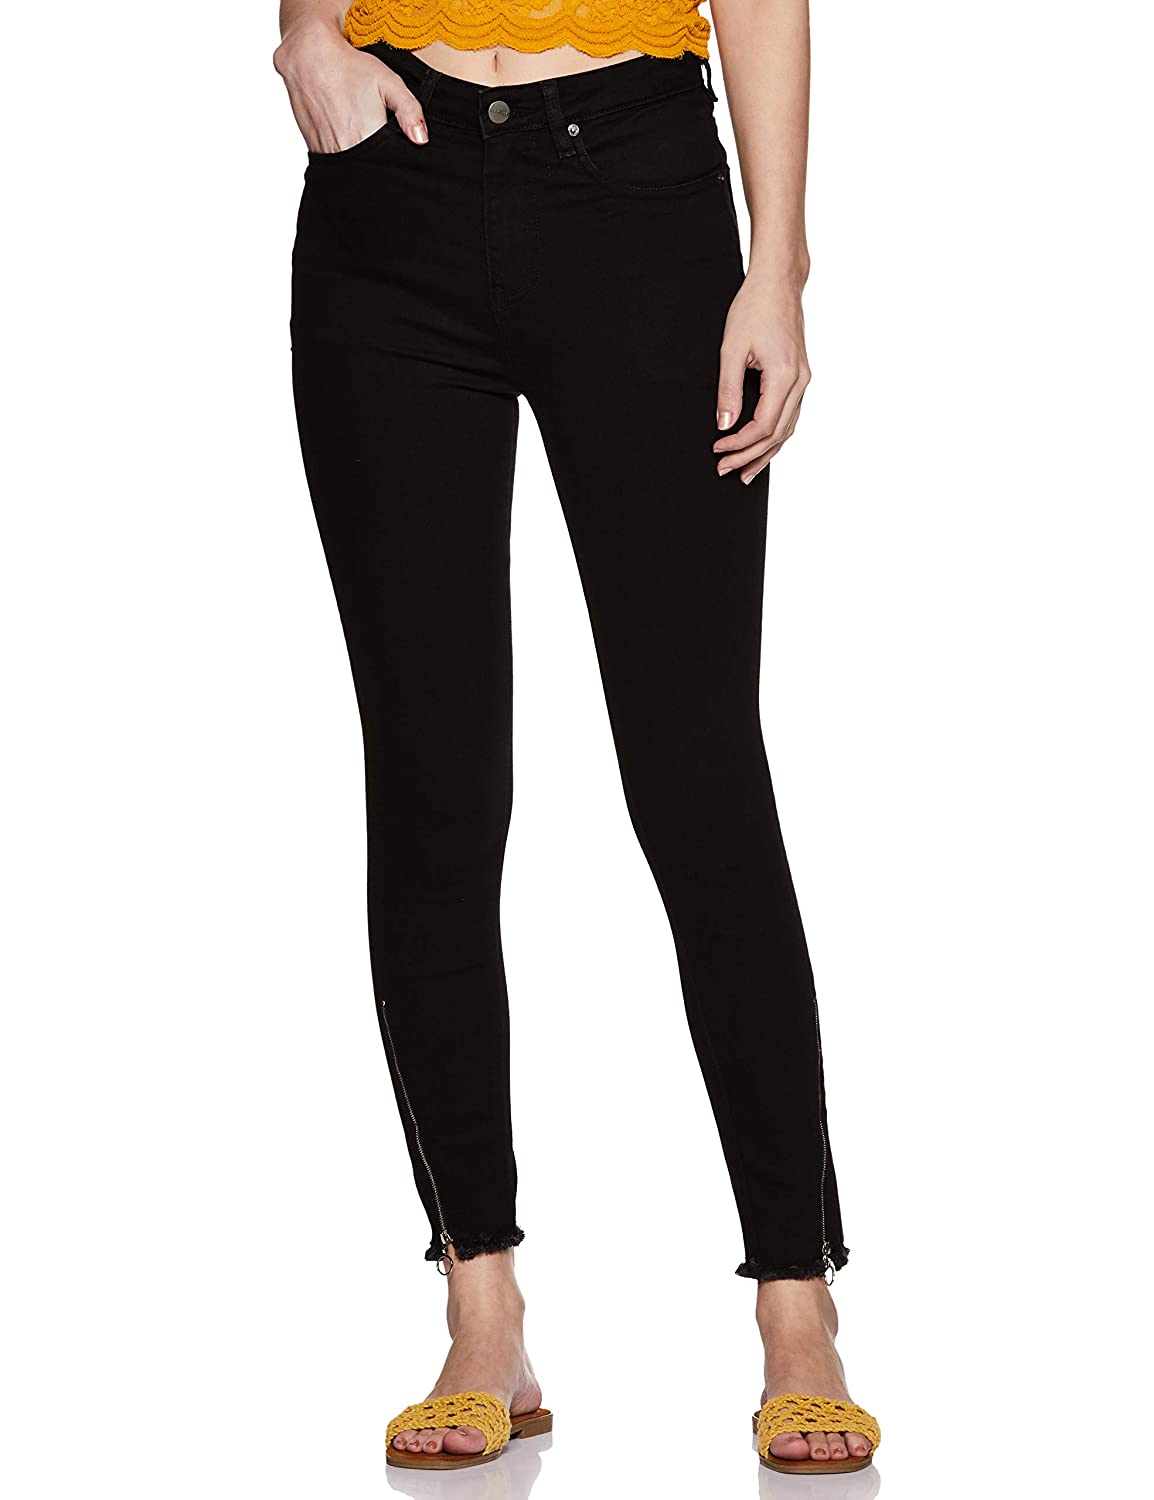 AKA CHIC Women's Slim Fit Jeans - Loot Deal - The Baap of Loot